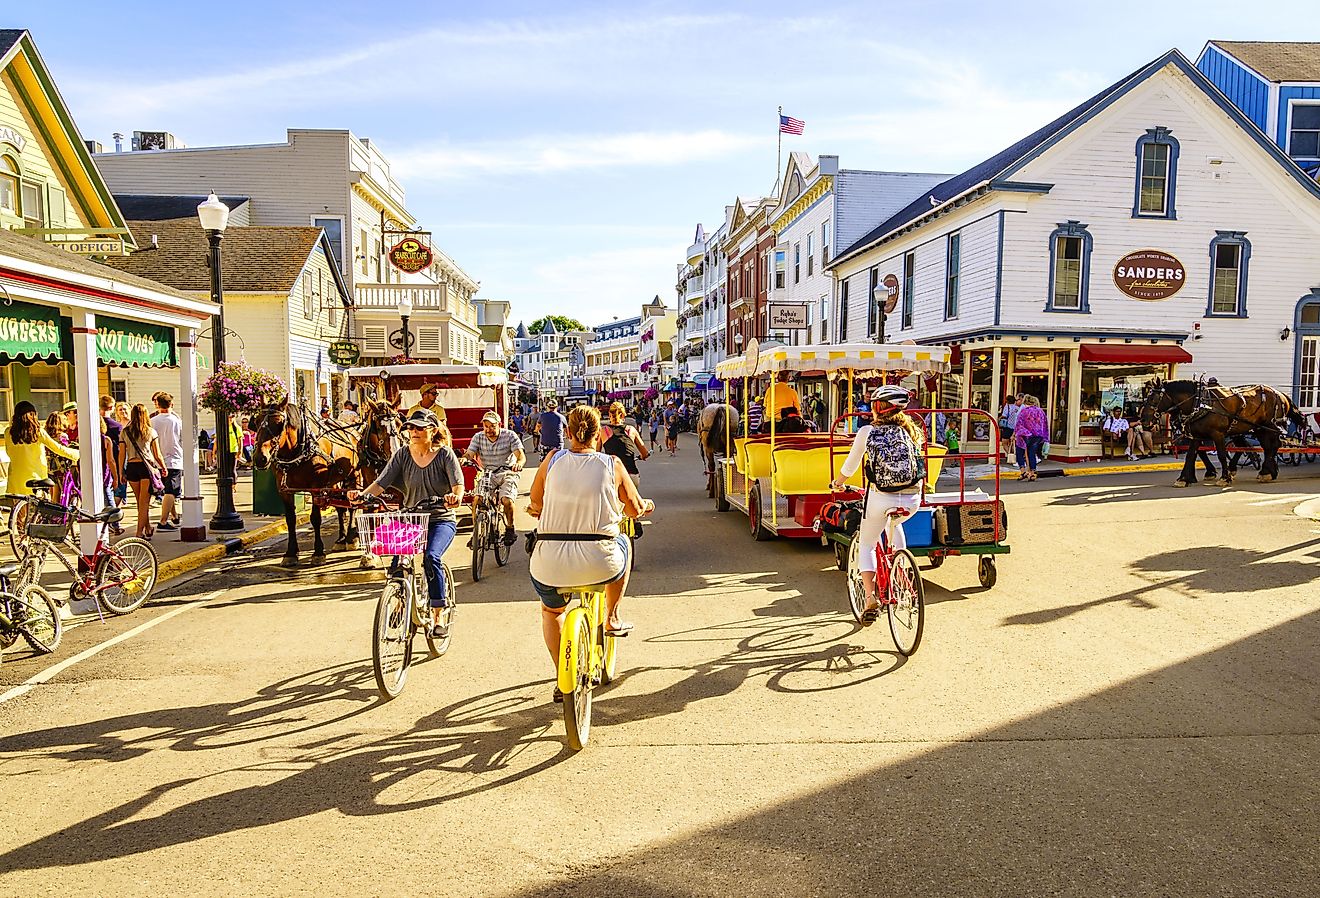 Vacationers take on Market Street on Mackinac Island that is lined with shops and restaurants. Image credit Alexey Stiop via Shutterstock.